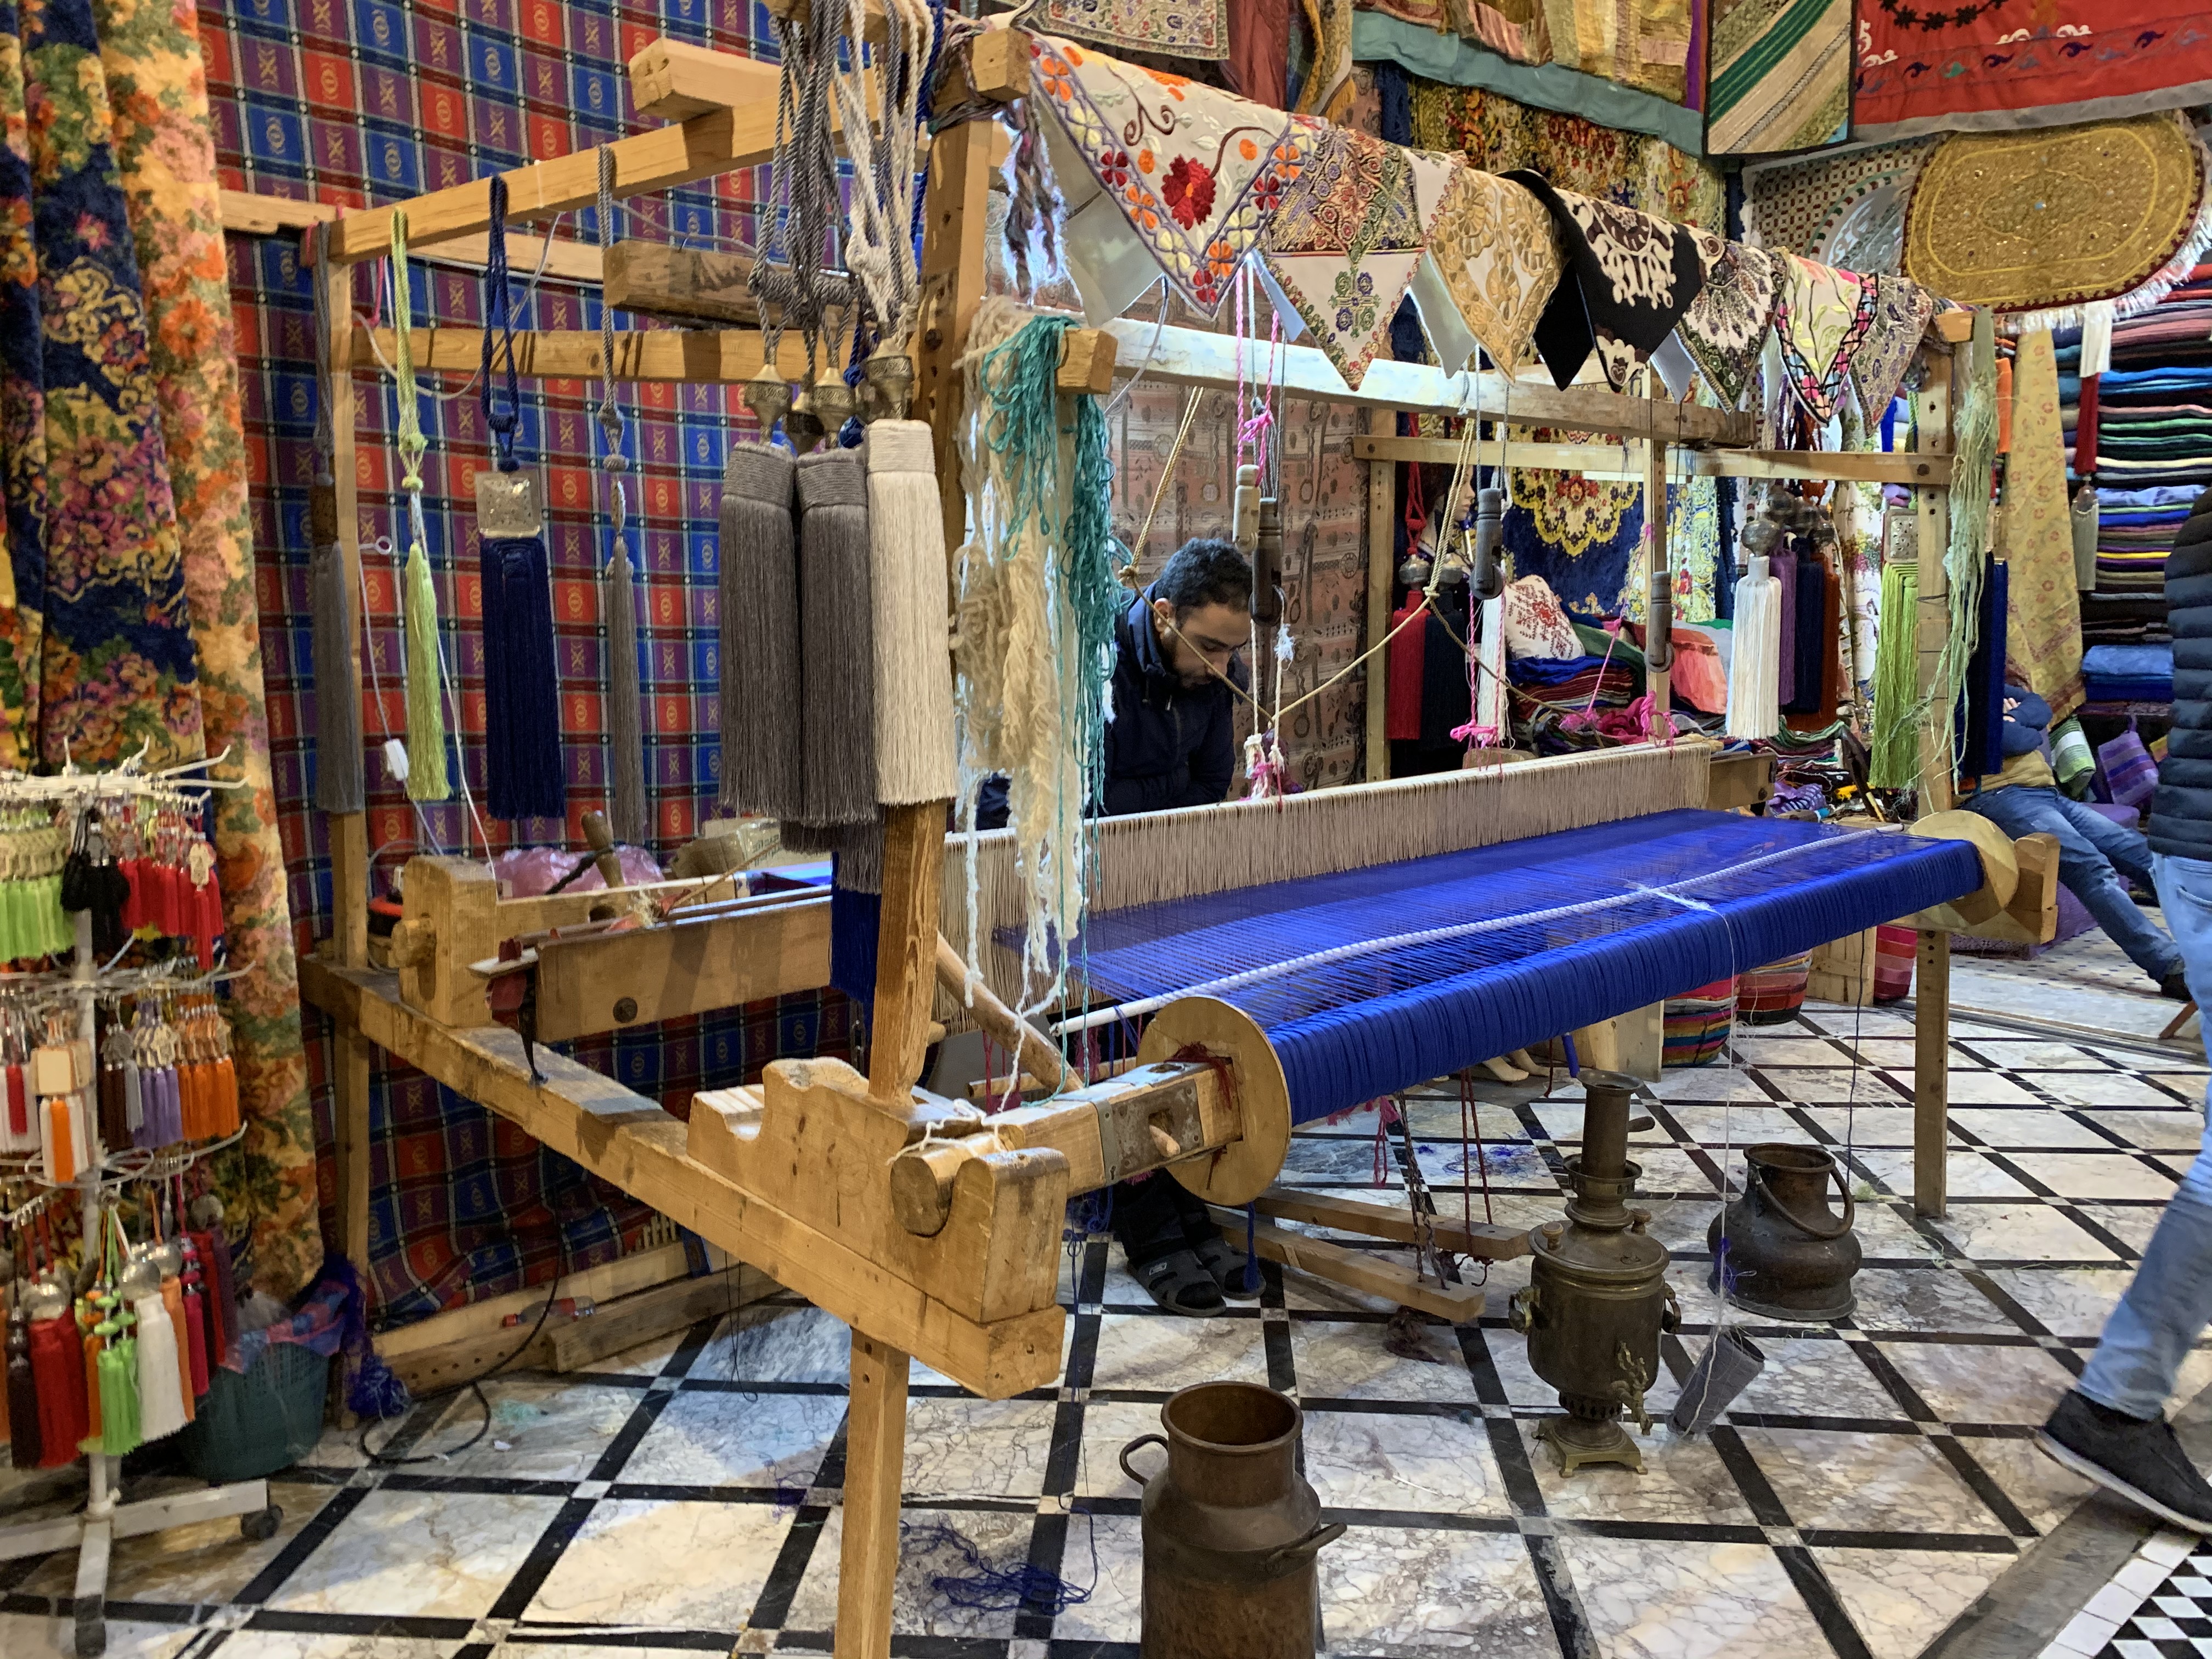 A large loom with right blue yarn.